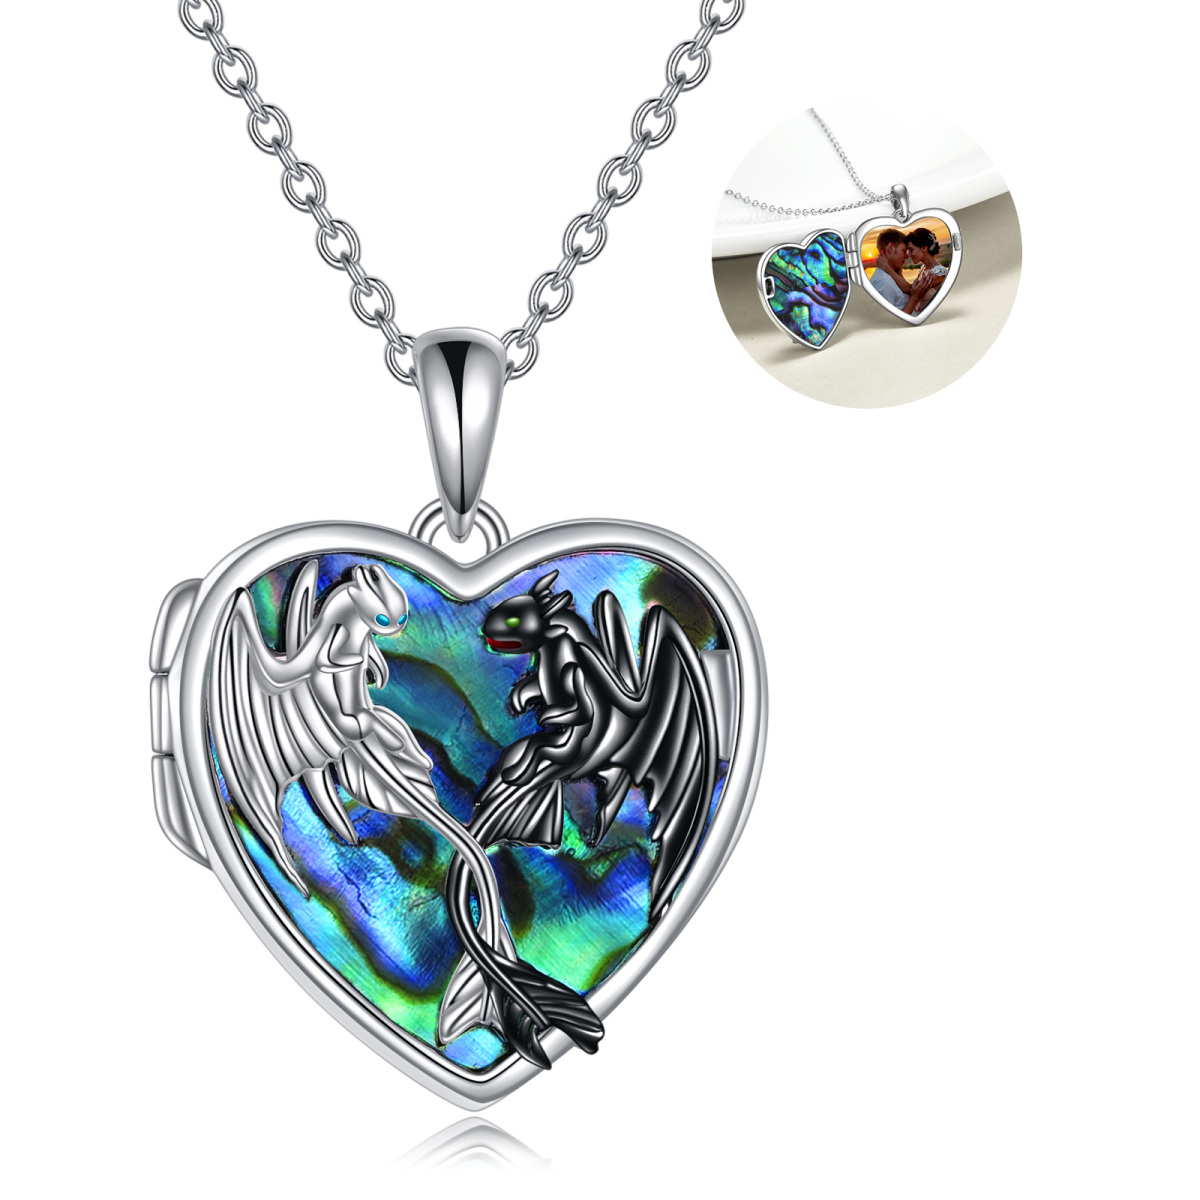 Collier en argent sterling bicolore Abalone Shellfish Dragon Personalized Photo Locket Nec-1